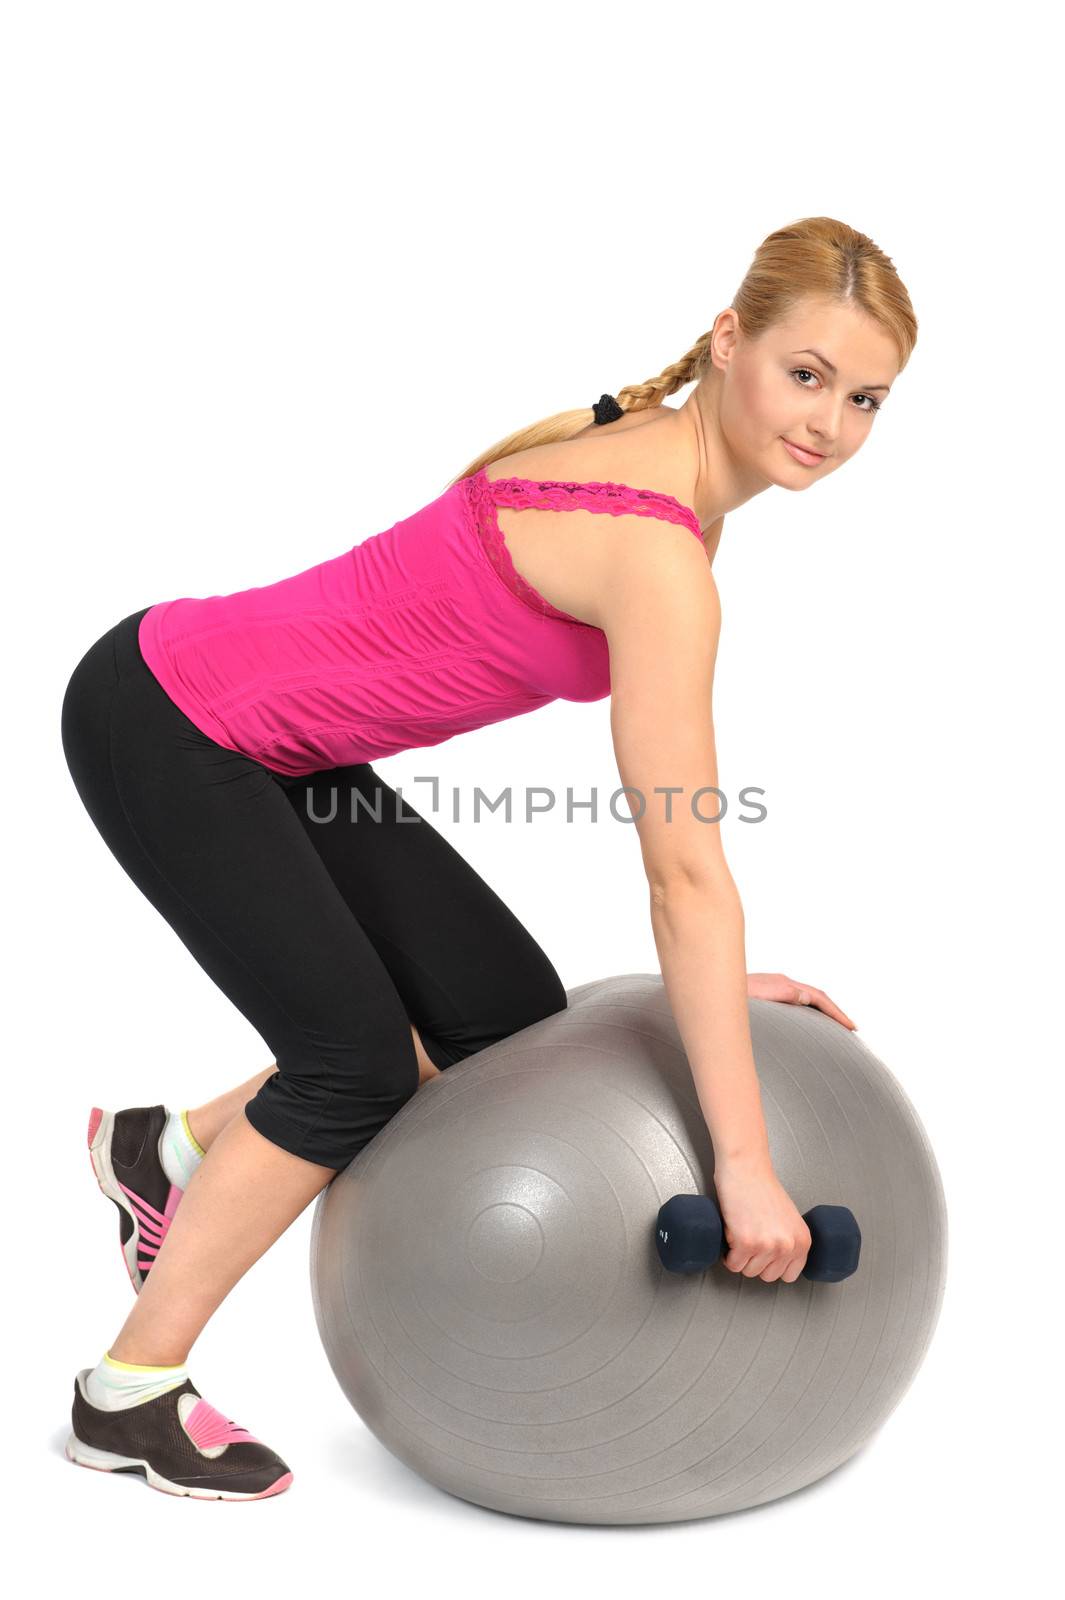 One-Arm Dumbbell Row on Stability Fitness Ball Exercise by starush